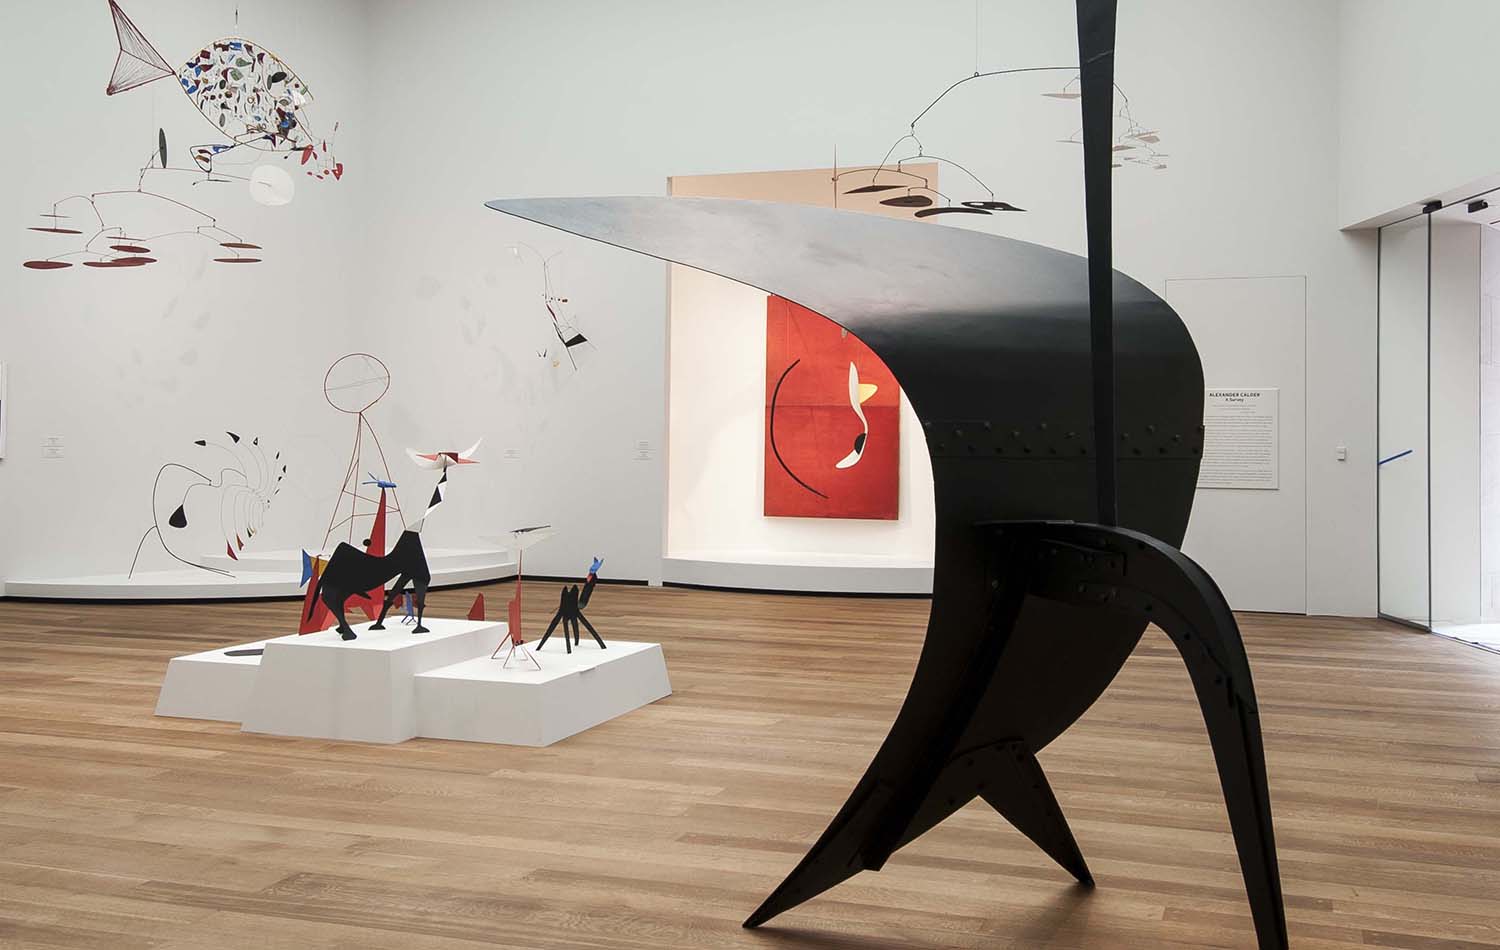  A top-floor gallery was built into one of I.M. Pei’s tower spaces, making room for a large display of works by Alexander Calder.&nbsp;Bill O'Leary/The Washington Post) 